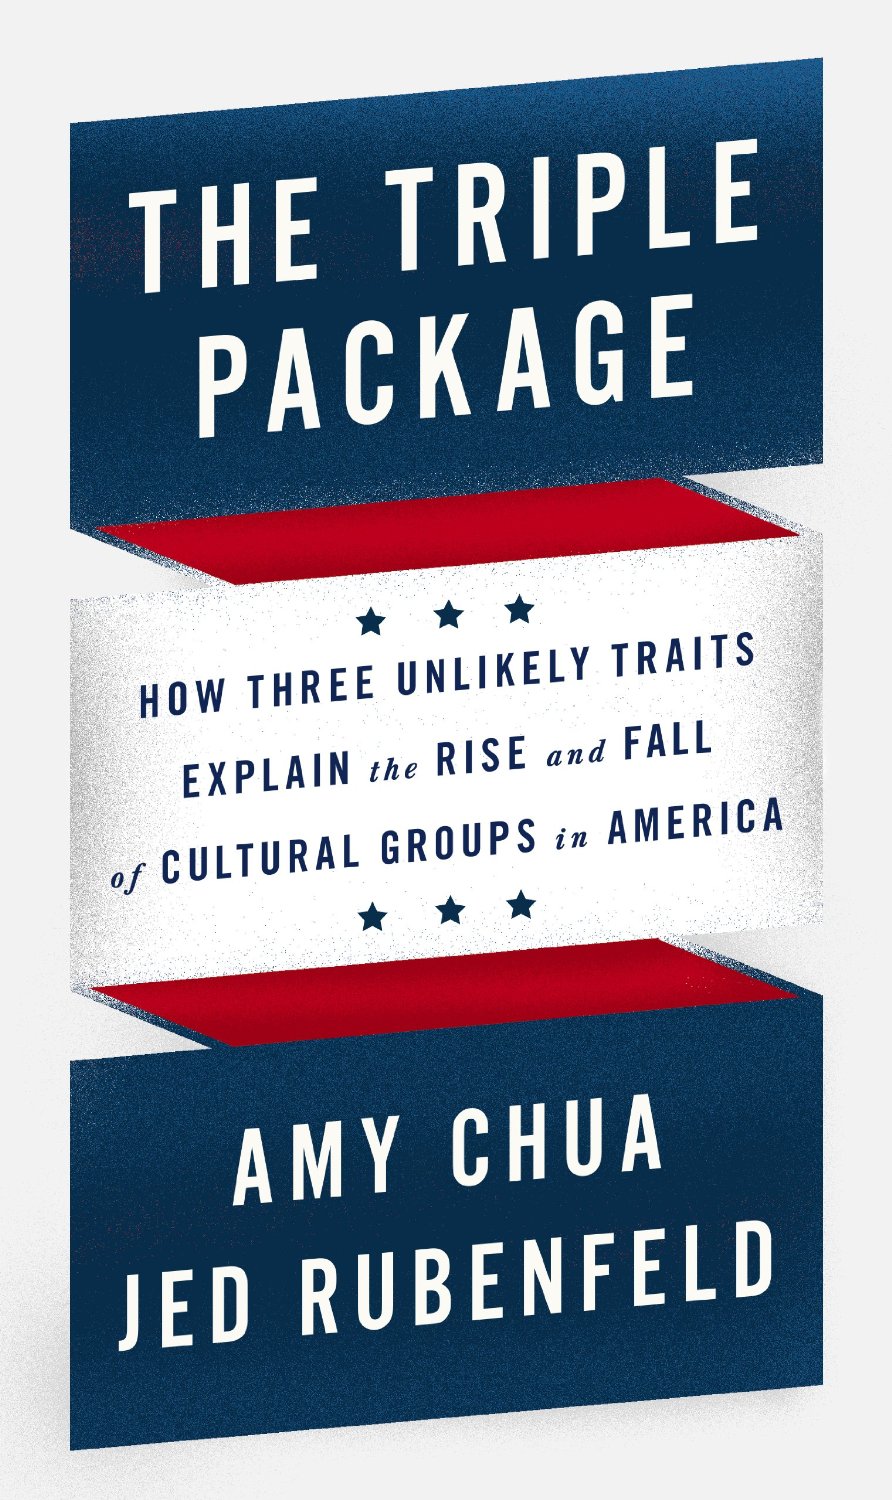 Cover of Chua and Rubenfeld's book "The triple package"